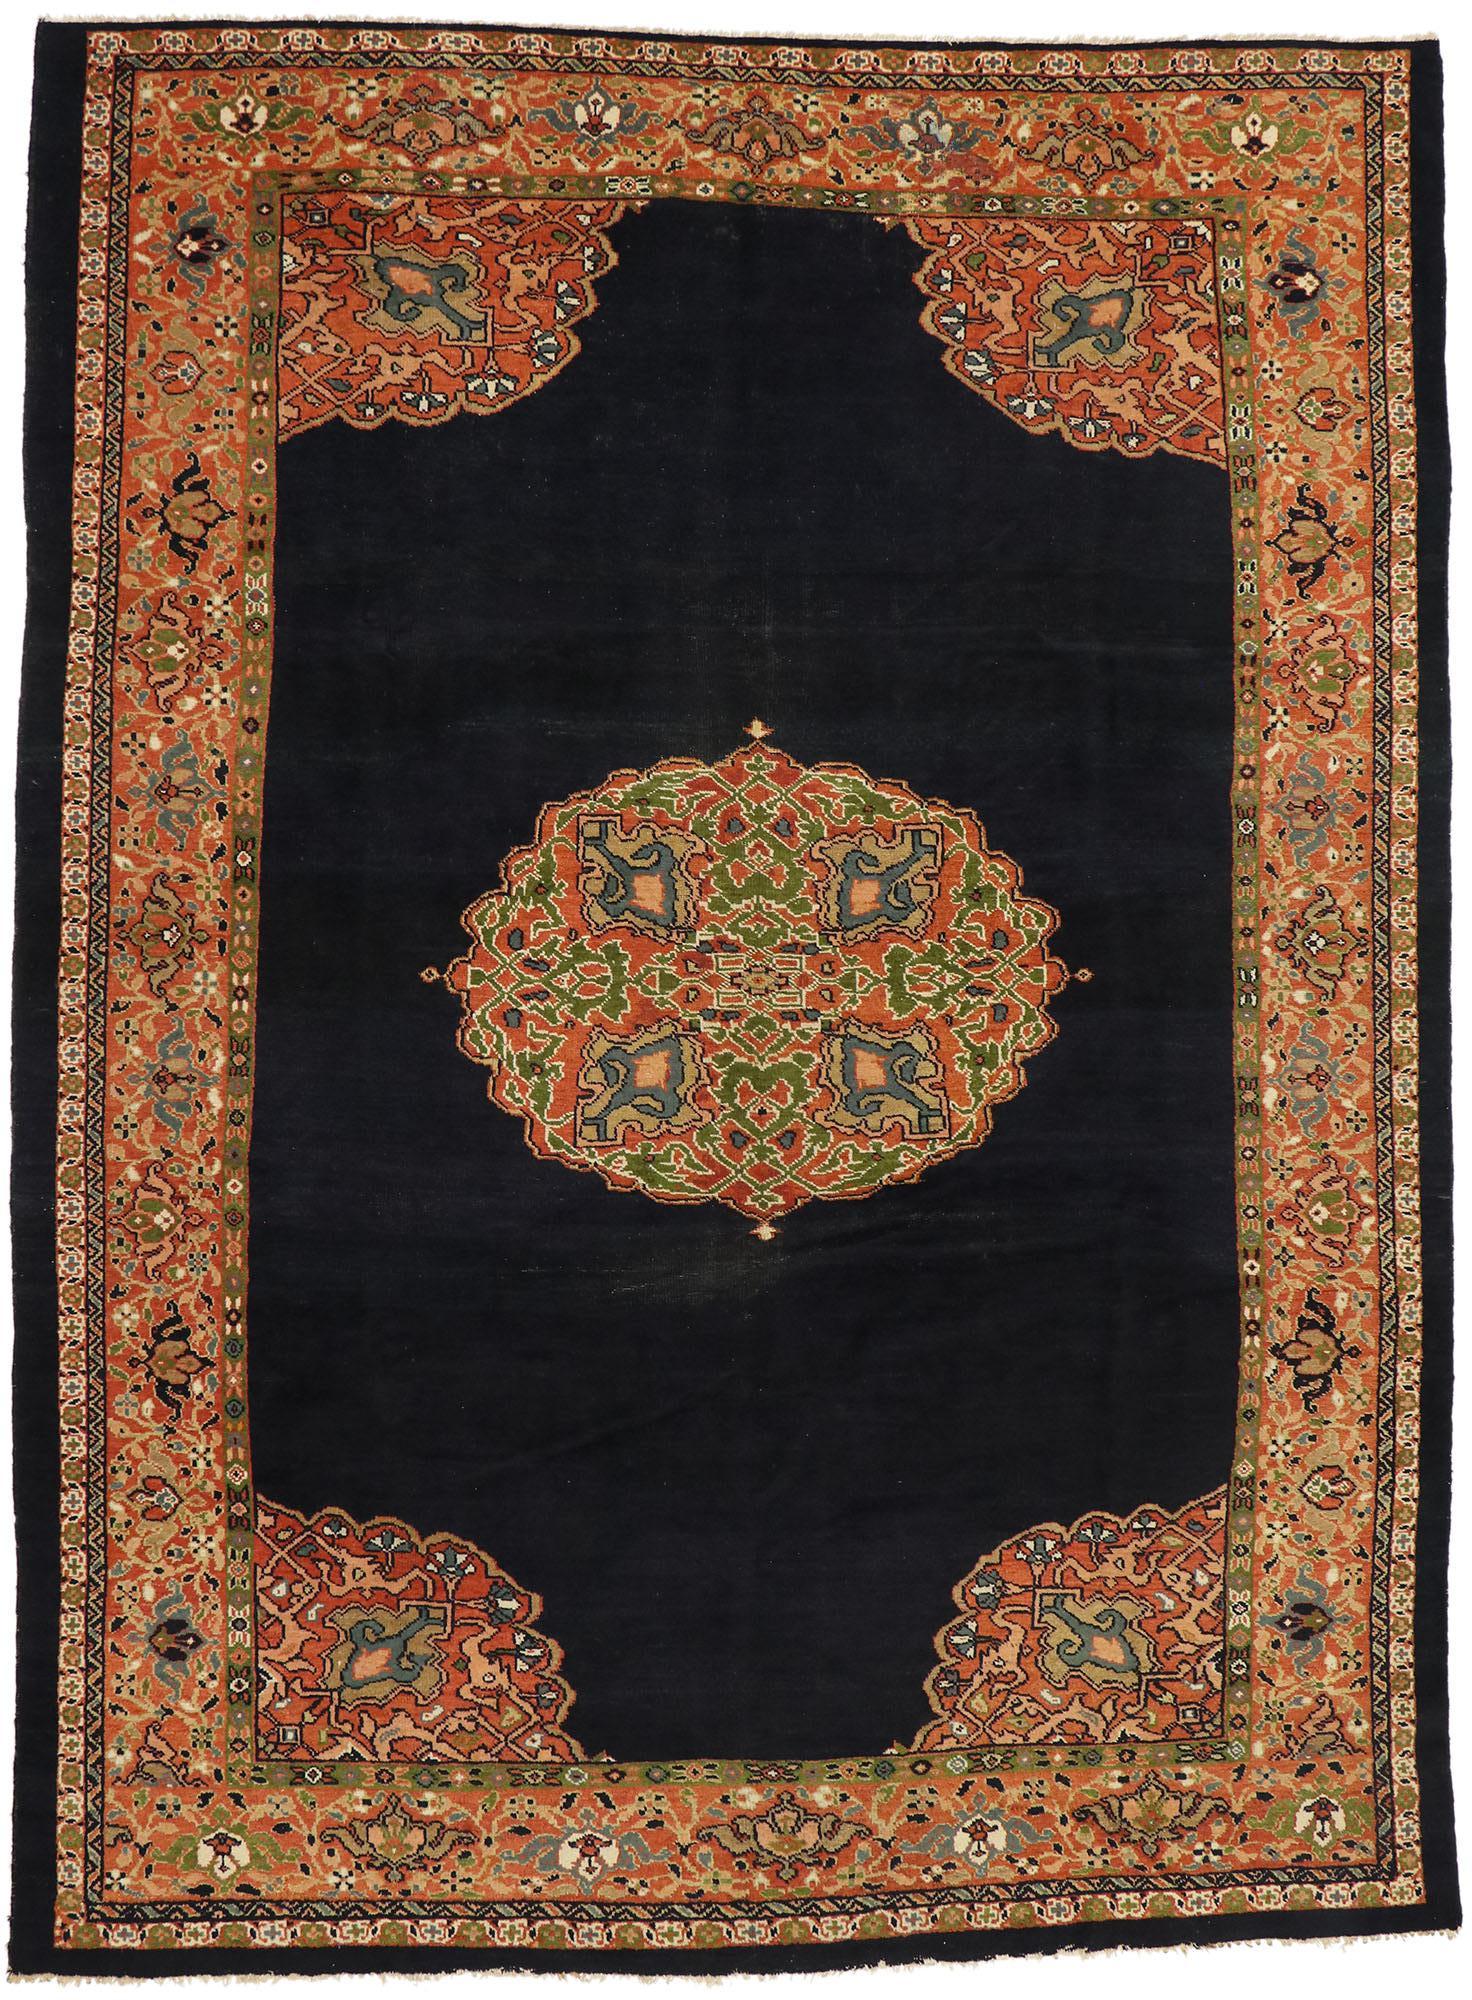 ​76774 Late 19th Century Antique Persian Sultanabad Rug with Modern Jacobean Style 09'09 x 13'03. With a bold botanical pattern and striking appeal, this hand knotted wool antique Persian Sultanabad rug can beautifully blend contemporary, modern,